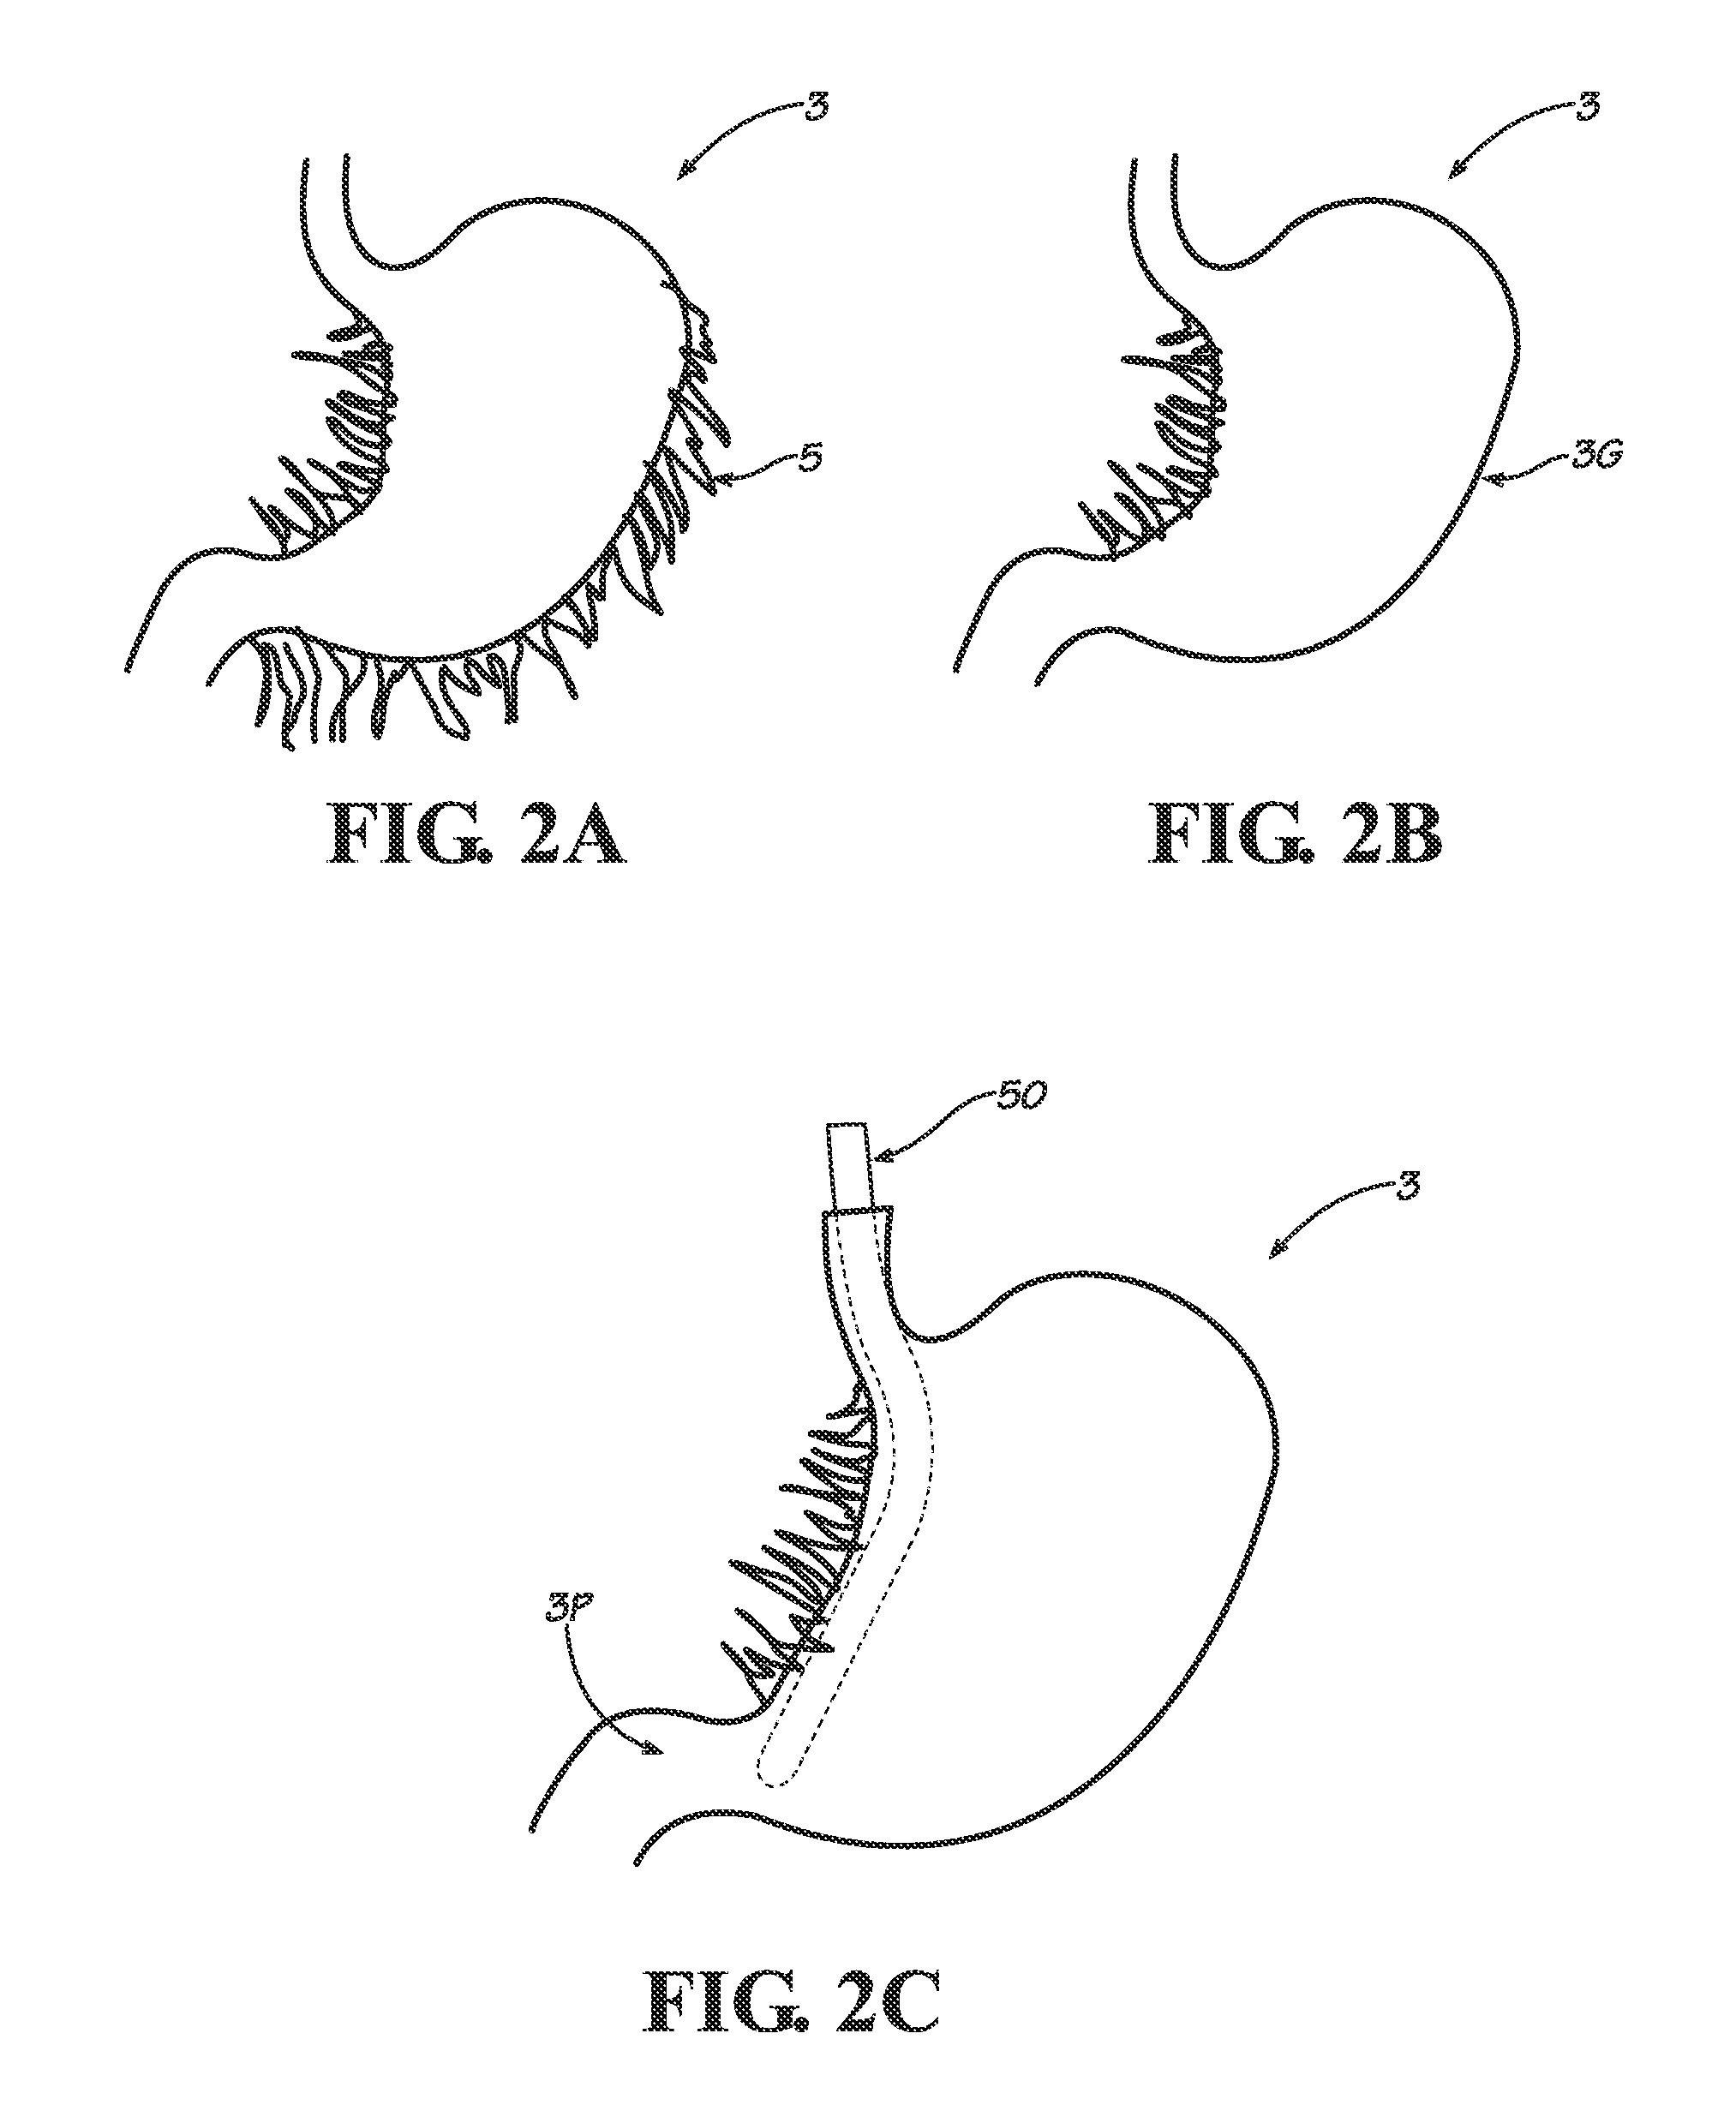 Methods, instruments and devices for extragastric reduction of stomach volume